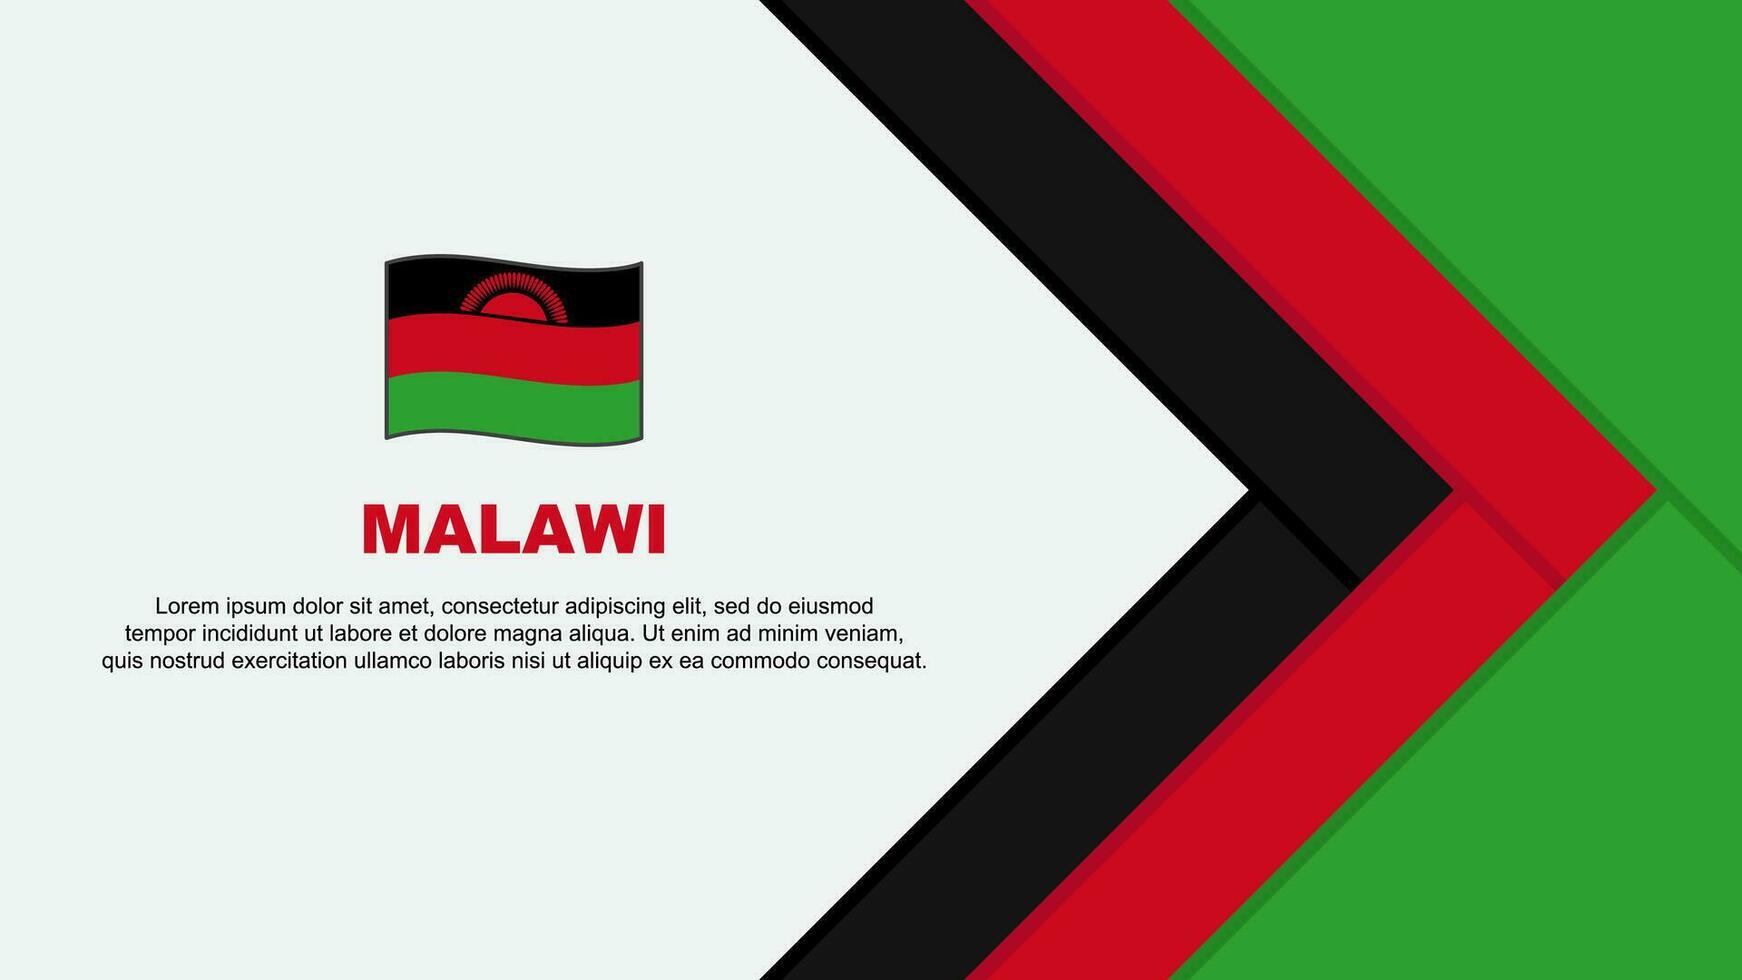 Malawi Flag Abstract Background Design Template. Malawi Independence Day Banner Cartoon Vector Illustration. Malawi Cartoon